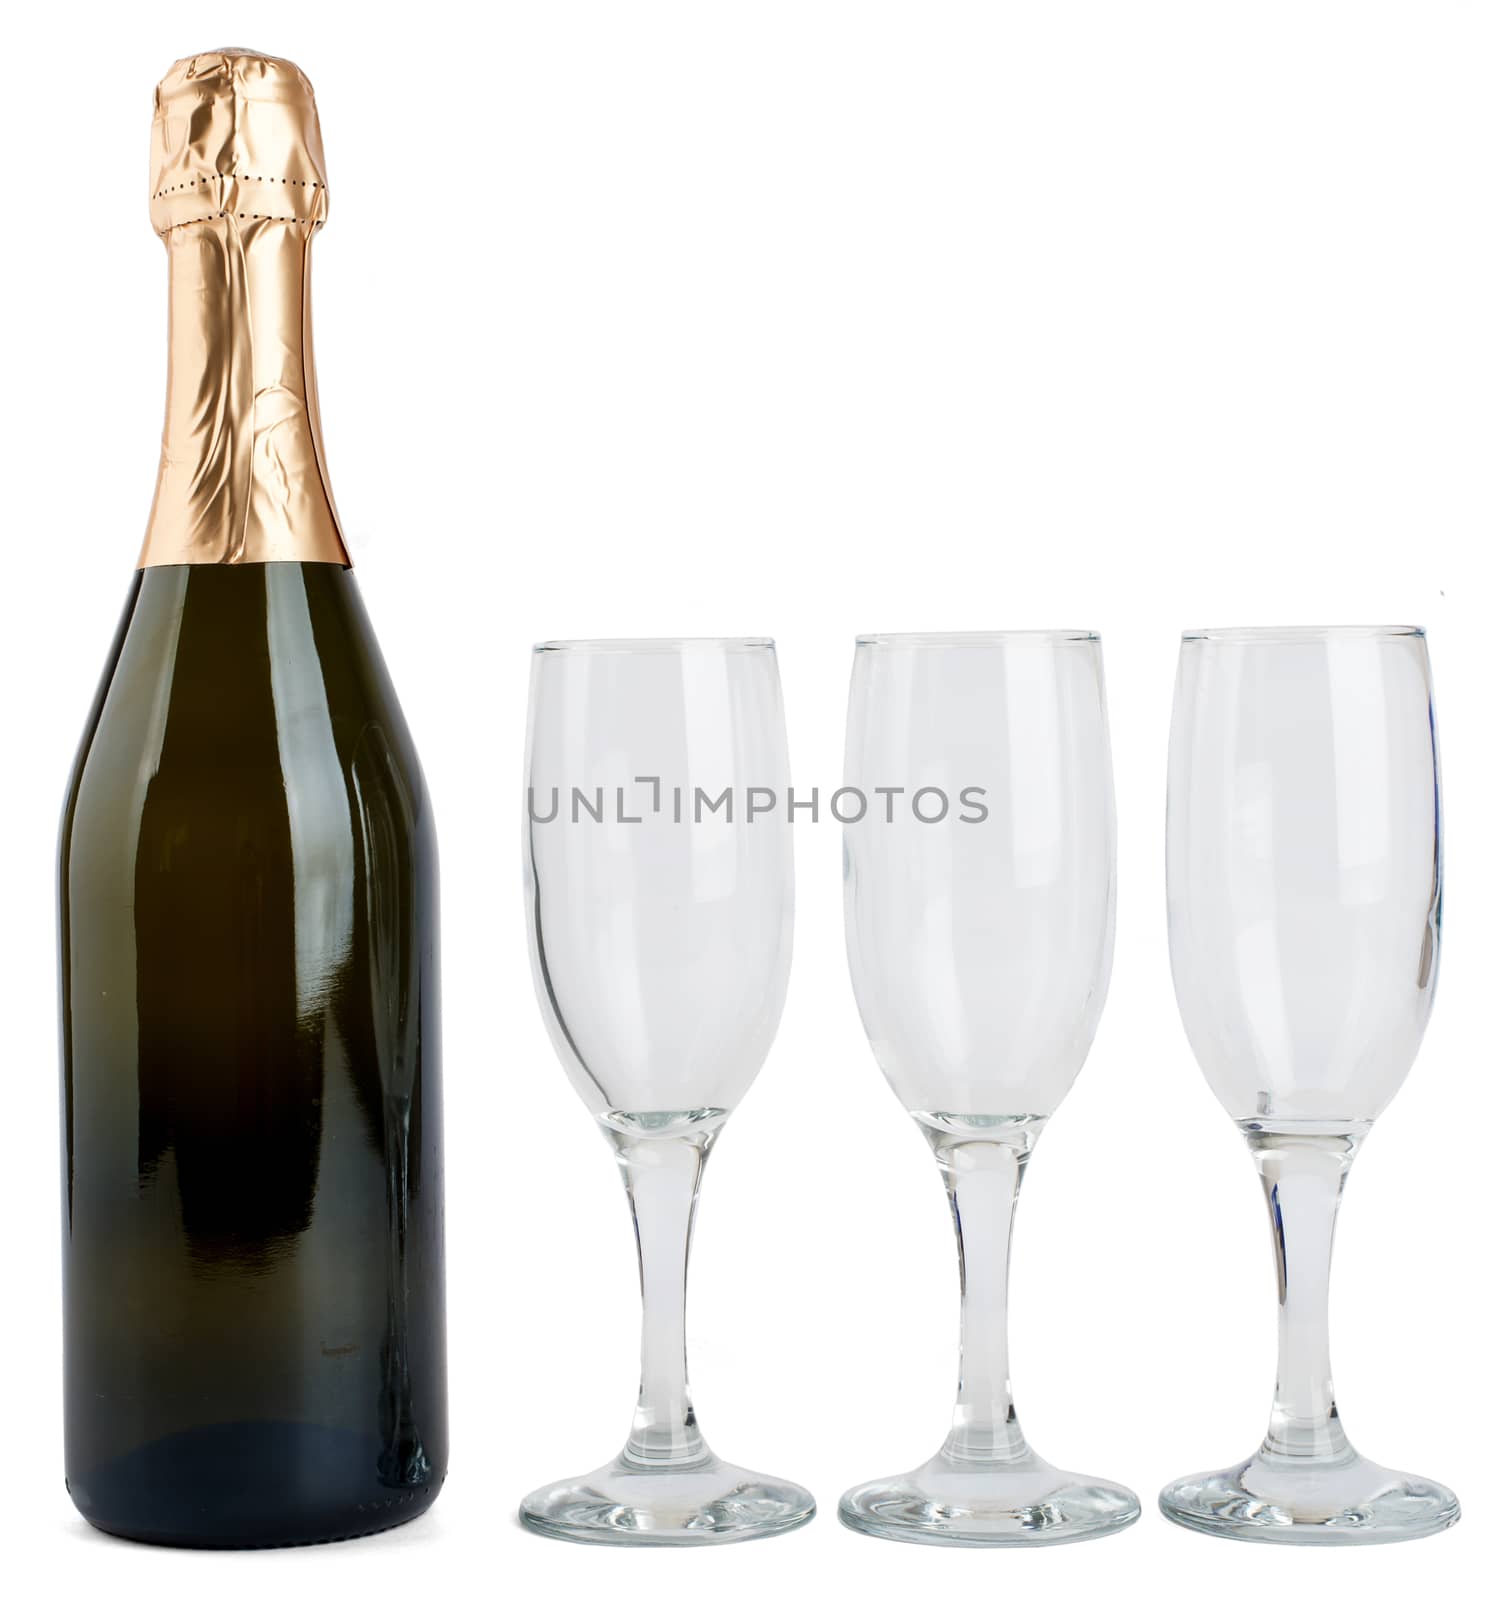 Champagne bottle and three champagne glasses isolated on white background